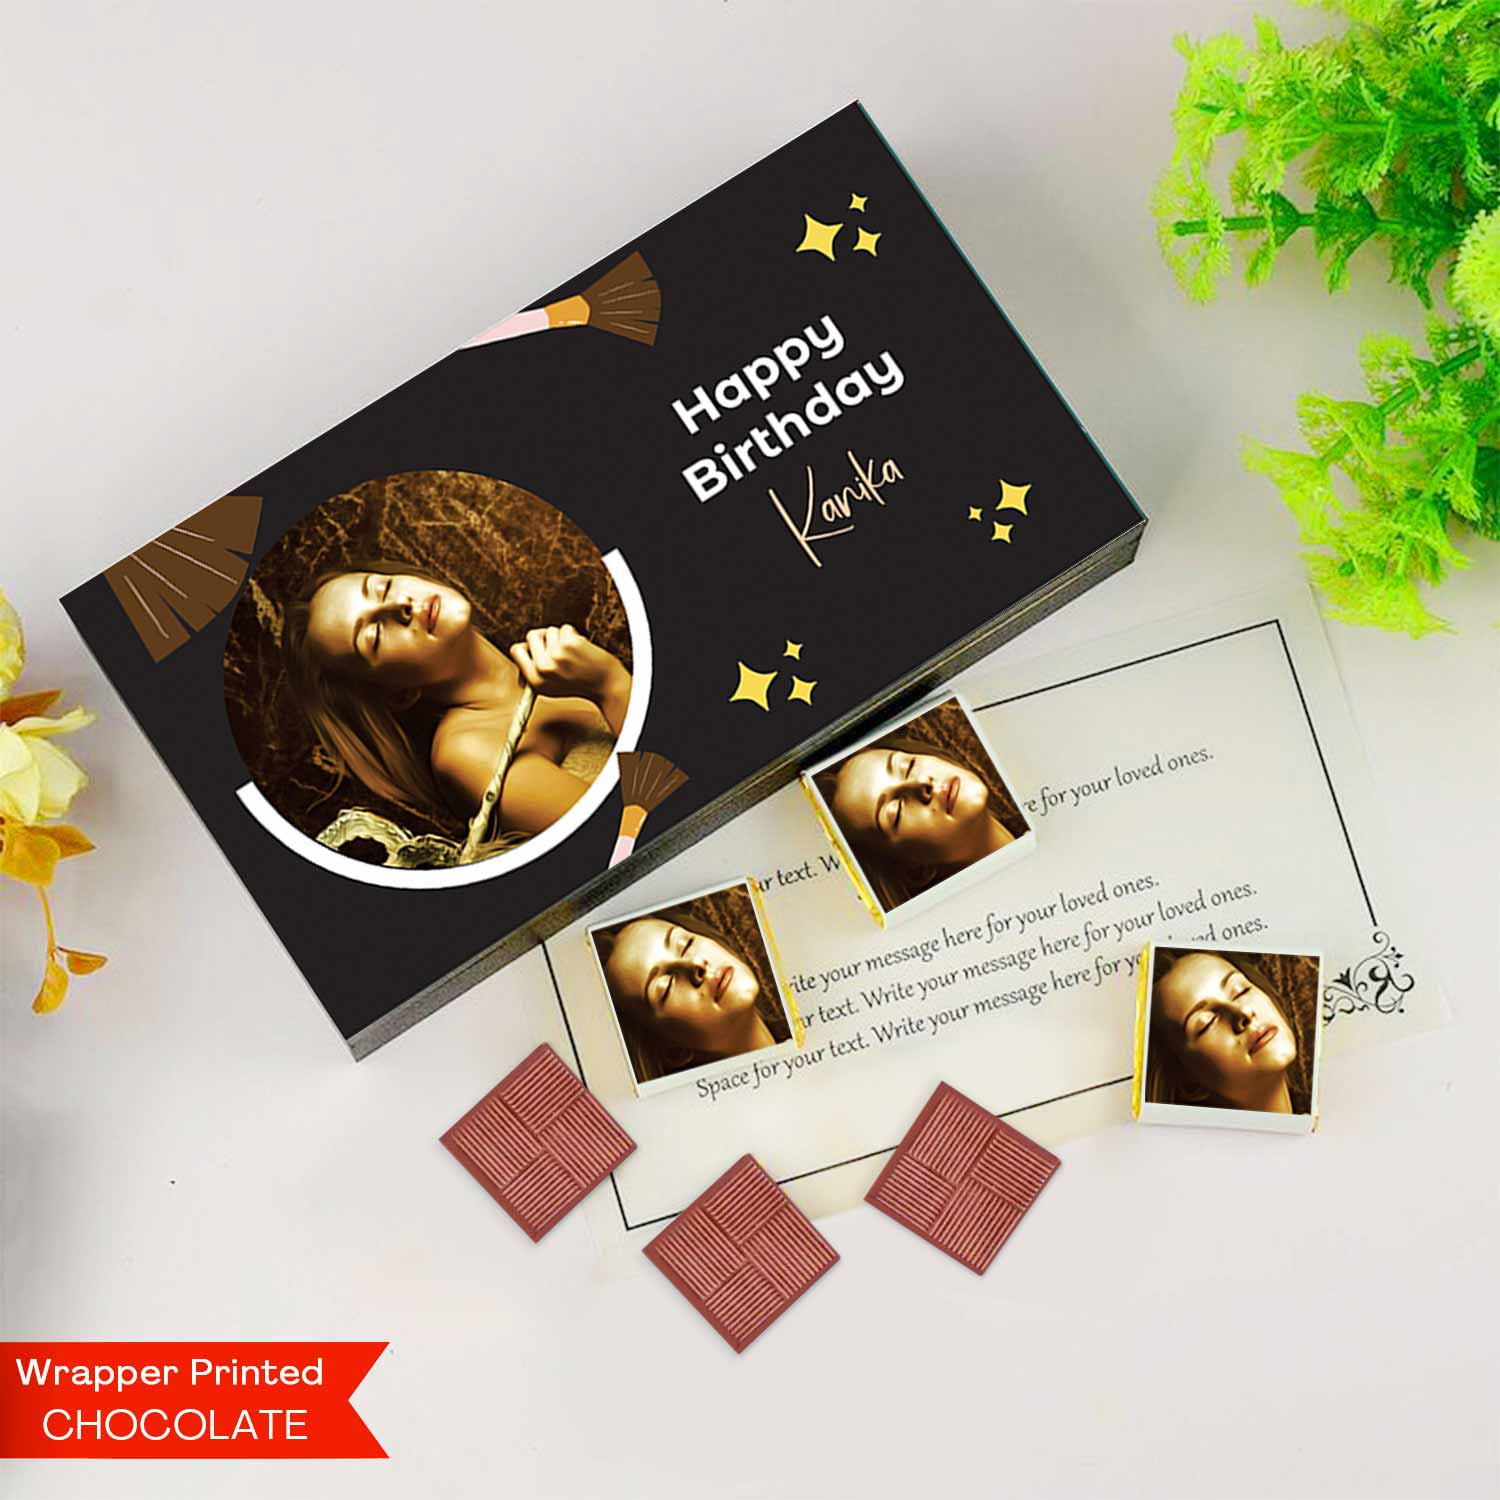  personalised chocolates with names customised chocolate gifts personalized chocolate gift box personalised chocolates with photo personalised chocolates for birthdays personalised chocolates with photo india customised chocolates near me customized chocolate box near me